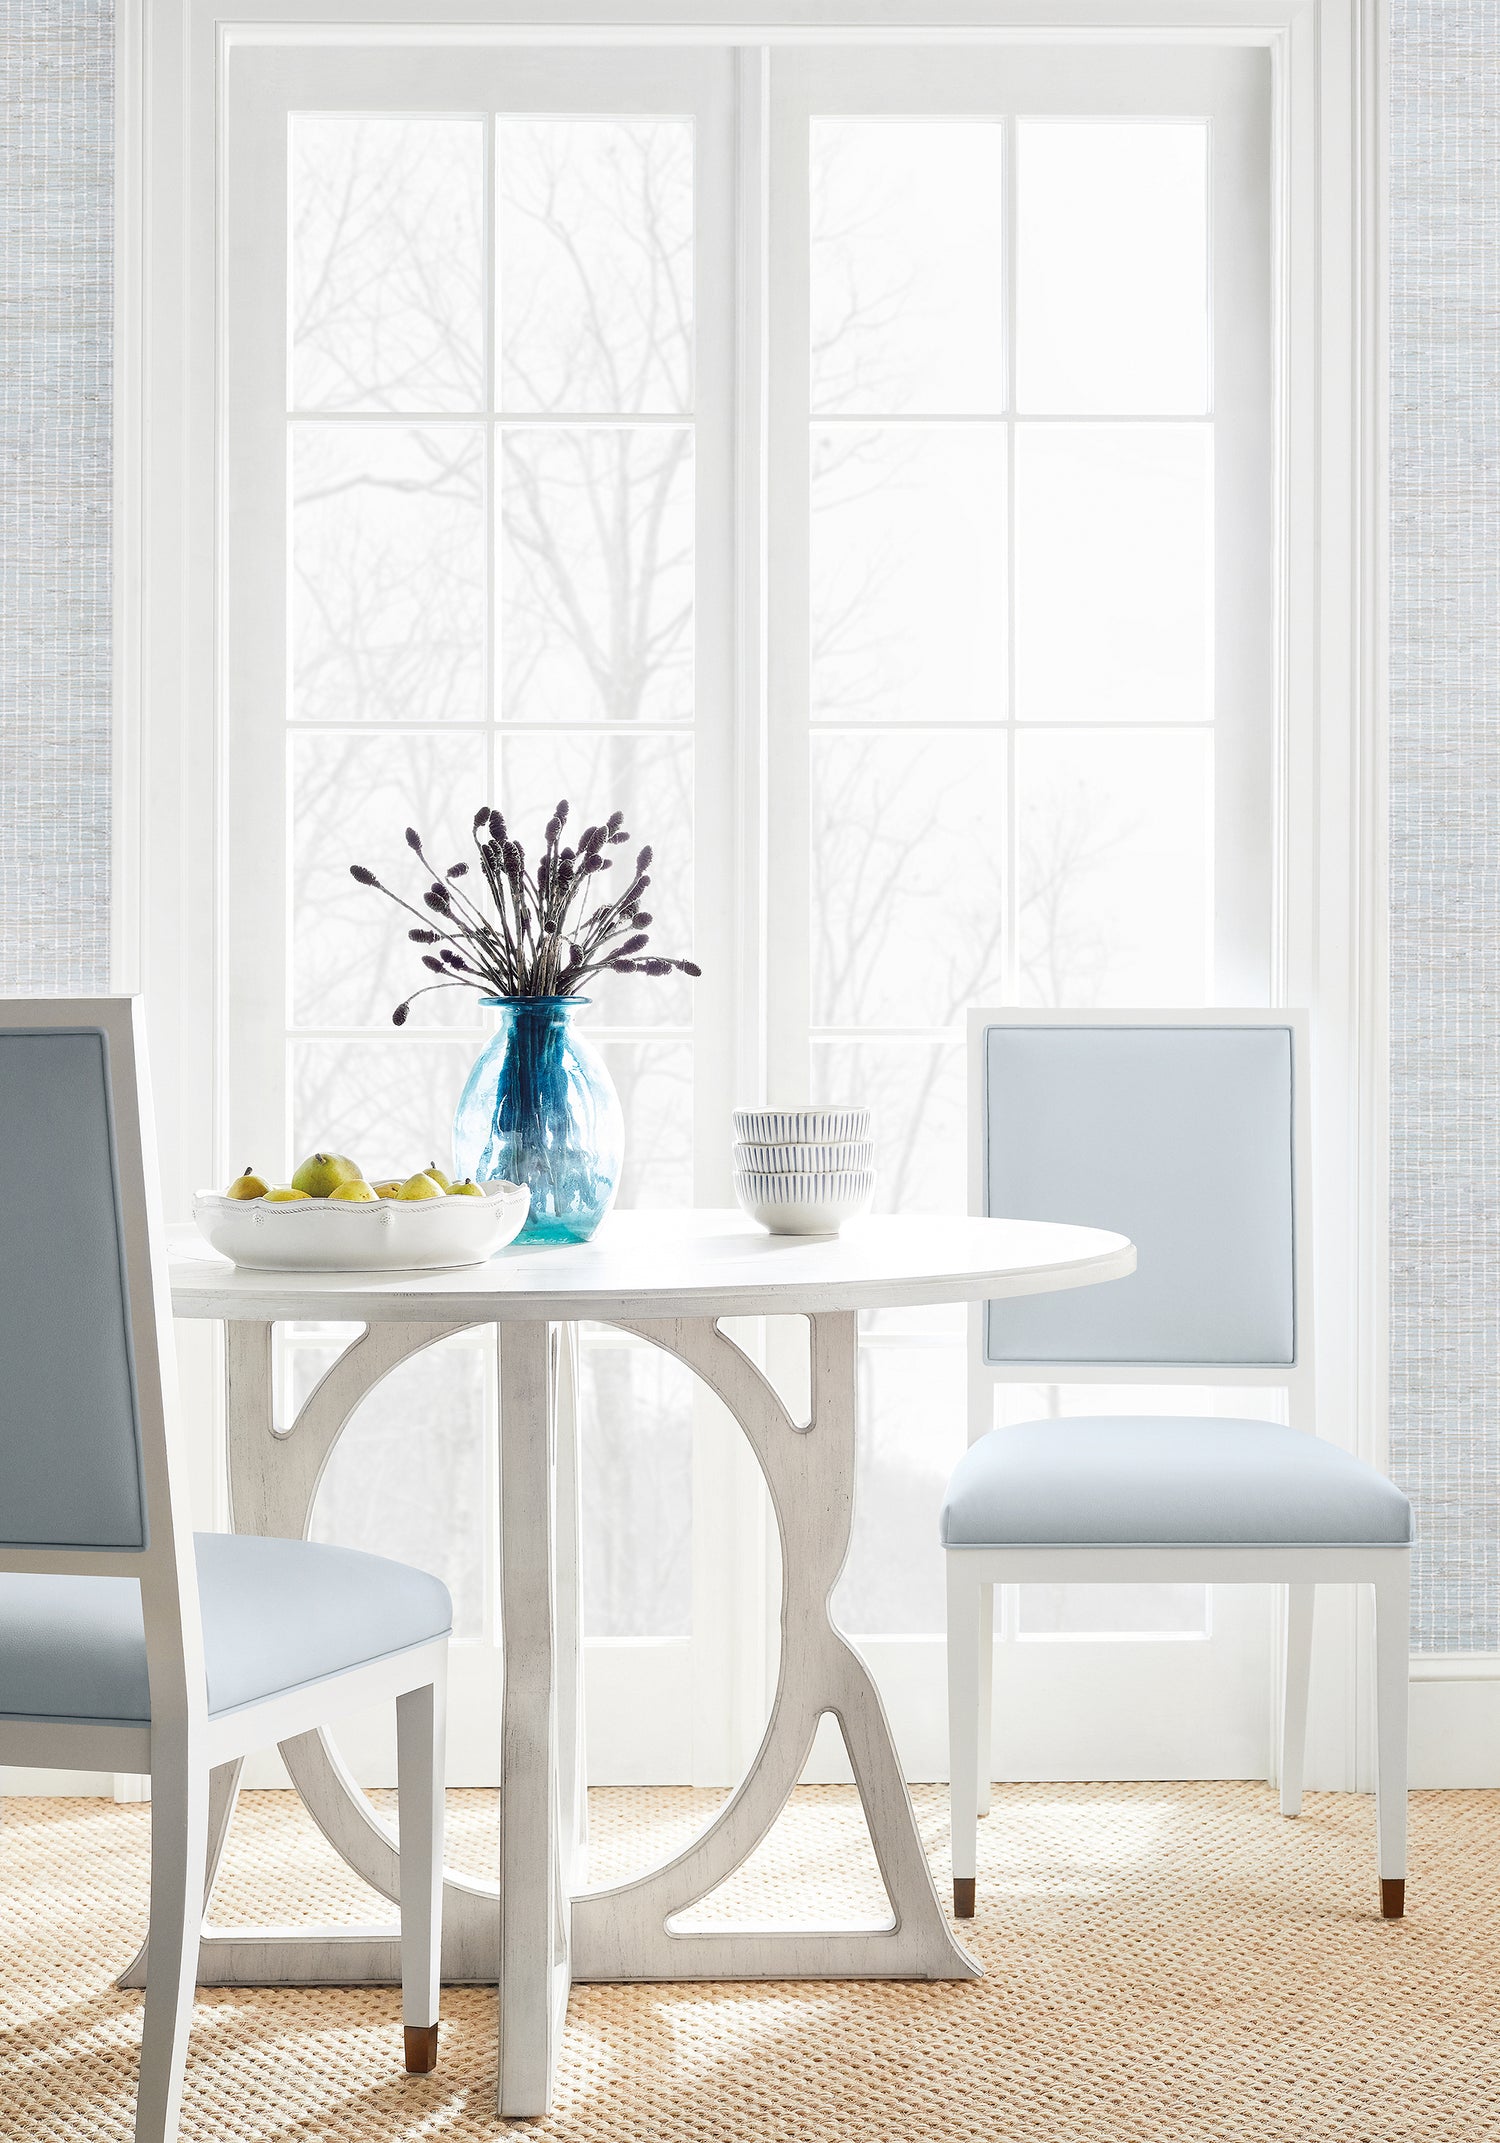 Lauderdale Dining Chairs in Arcata woven fabric in Glacier color by Thibaut pattern W78387